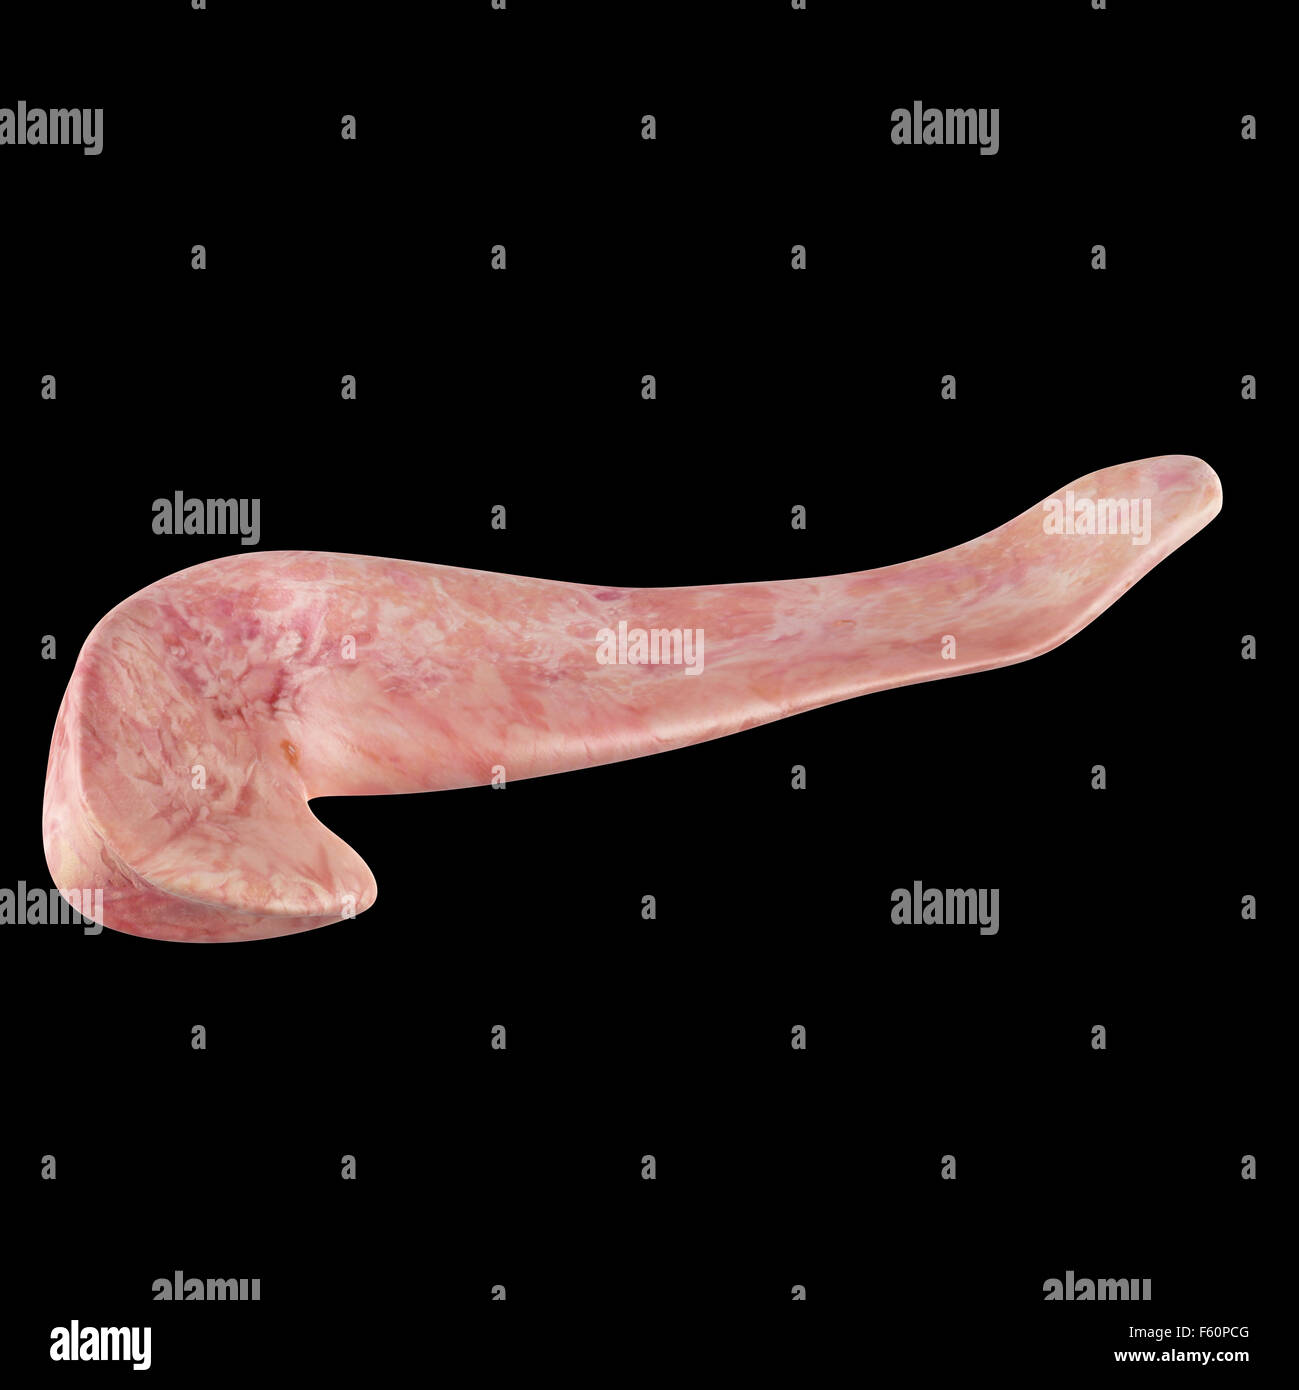 medically accurate illustration of the pancreas Stock Photo